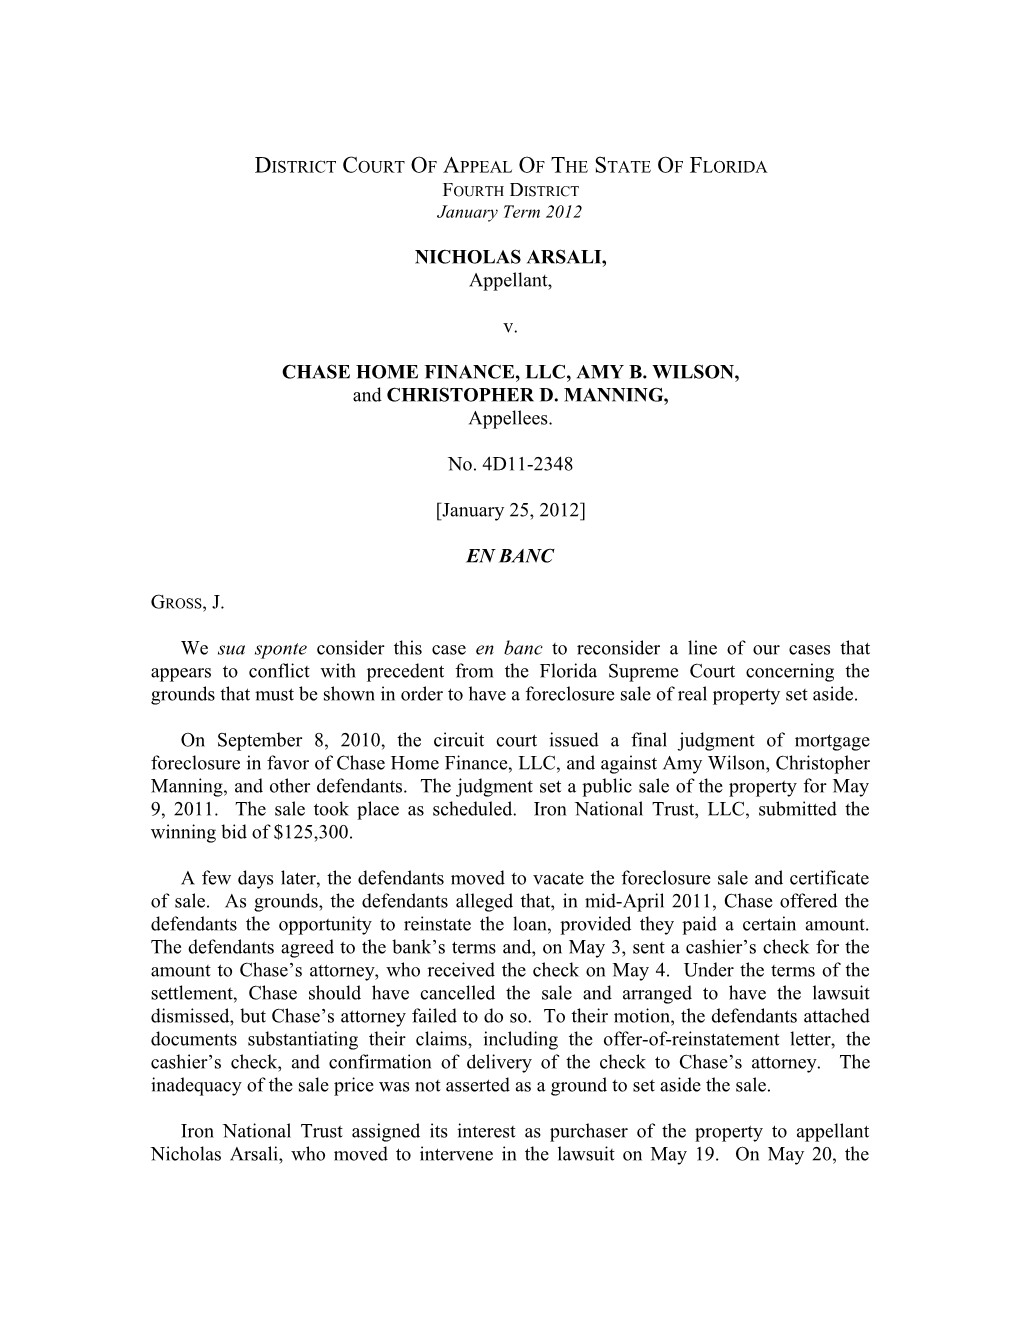 District Court of Appeal of the State of Florida s4